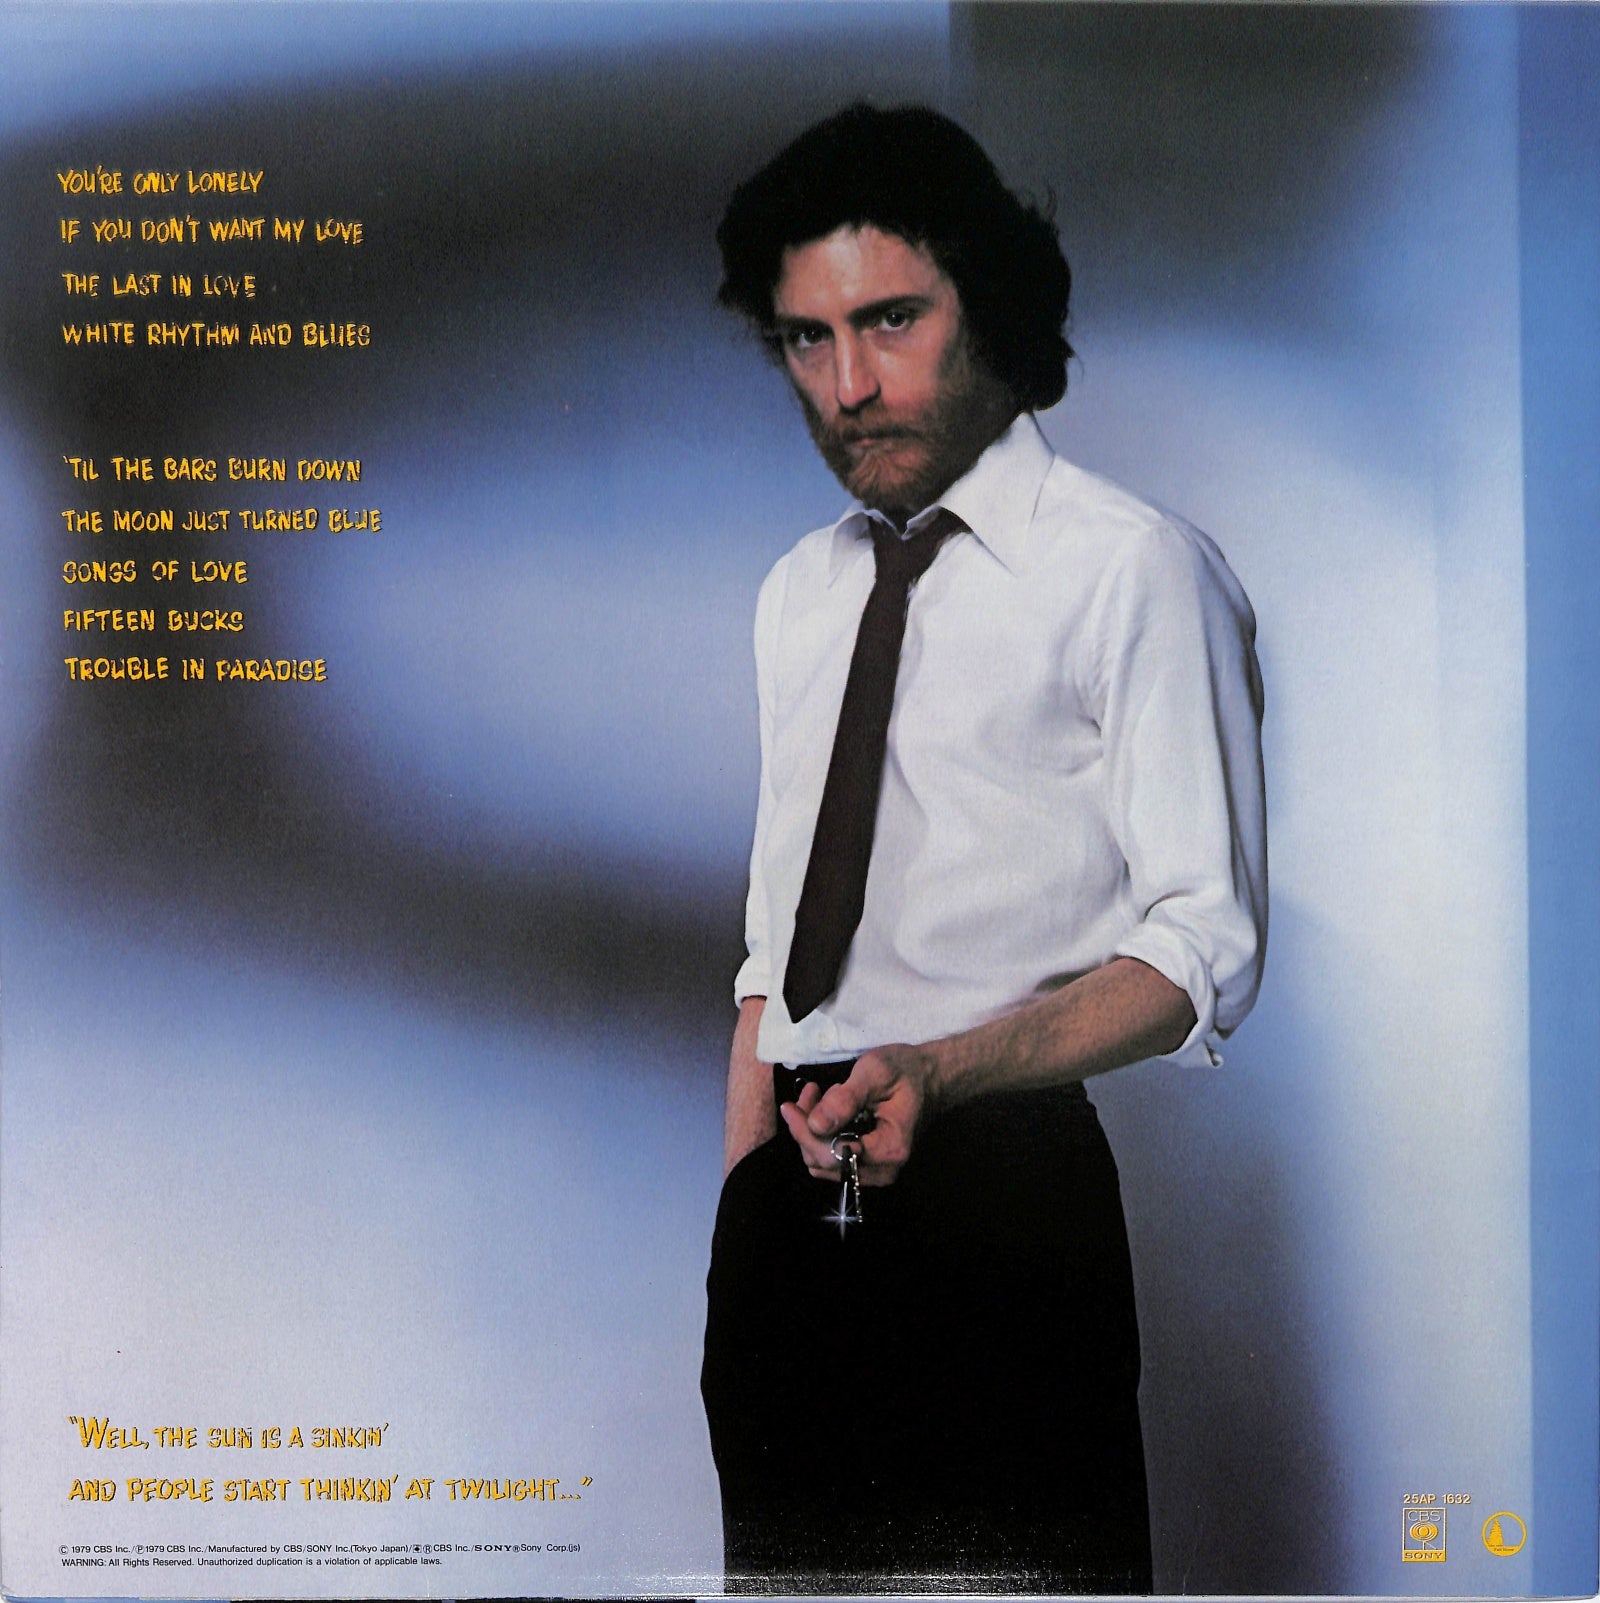 You're Only Lonely - J.D. Souther, Album